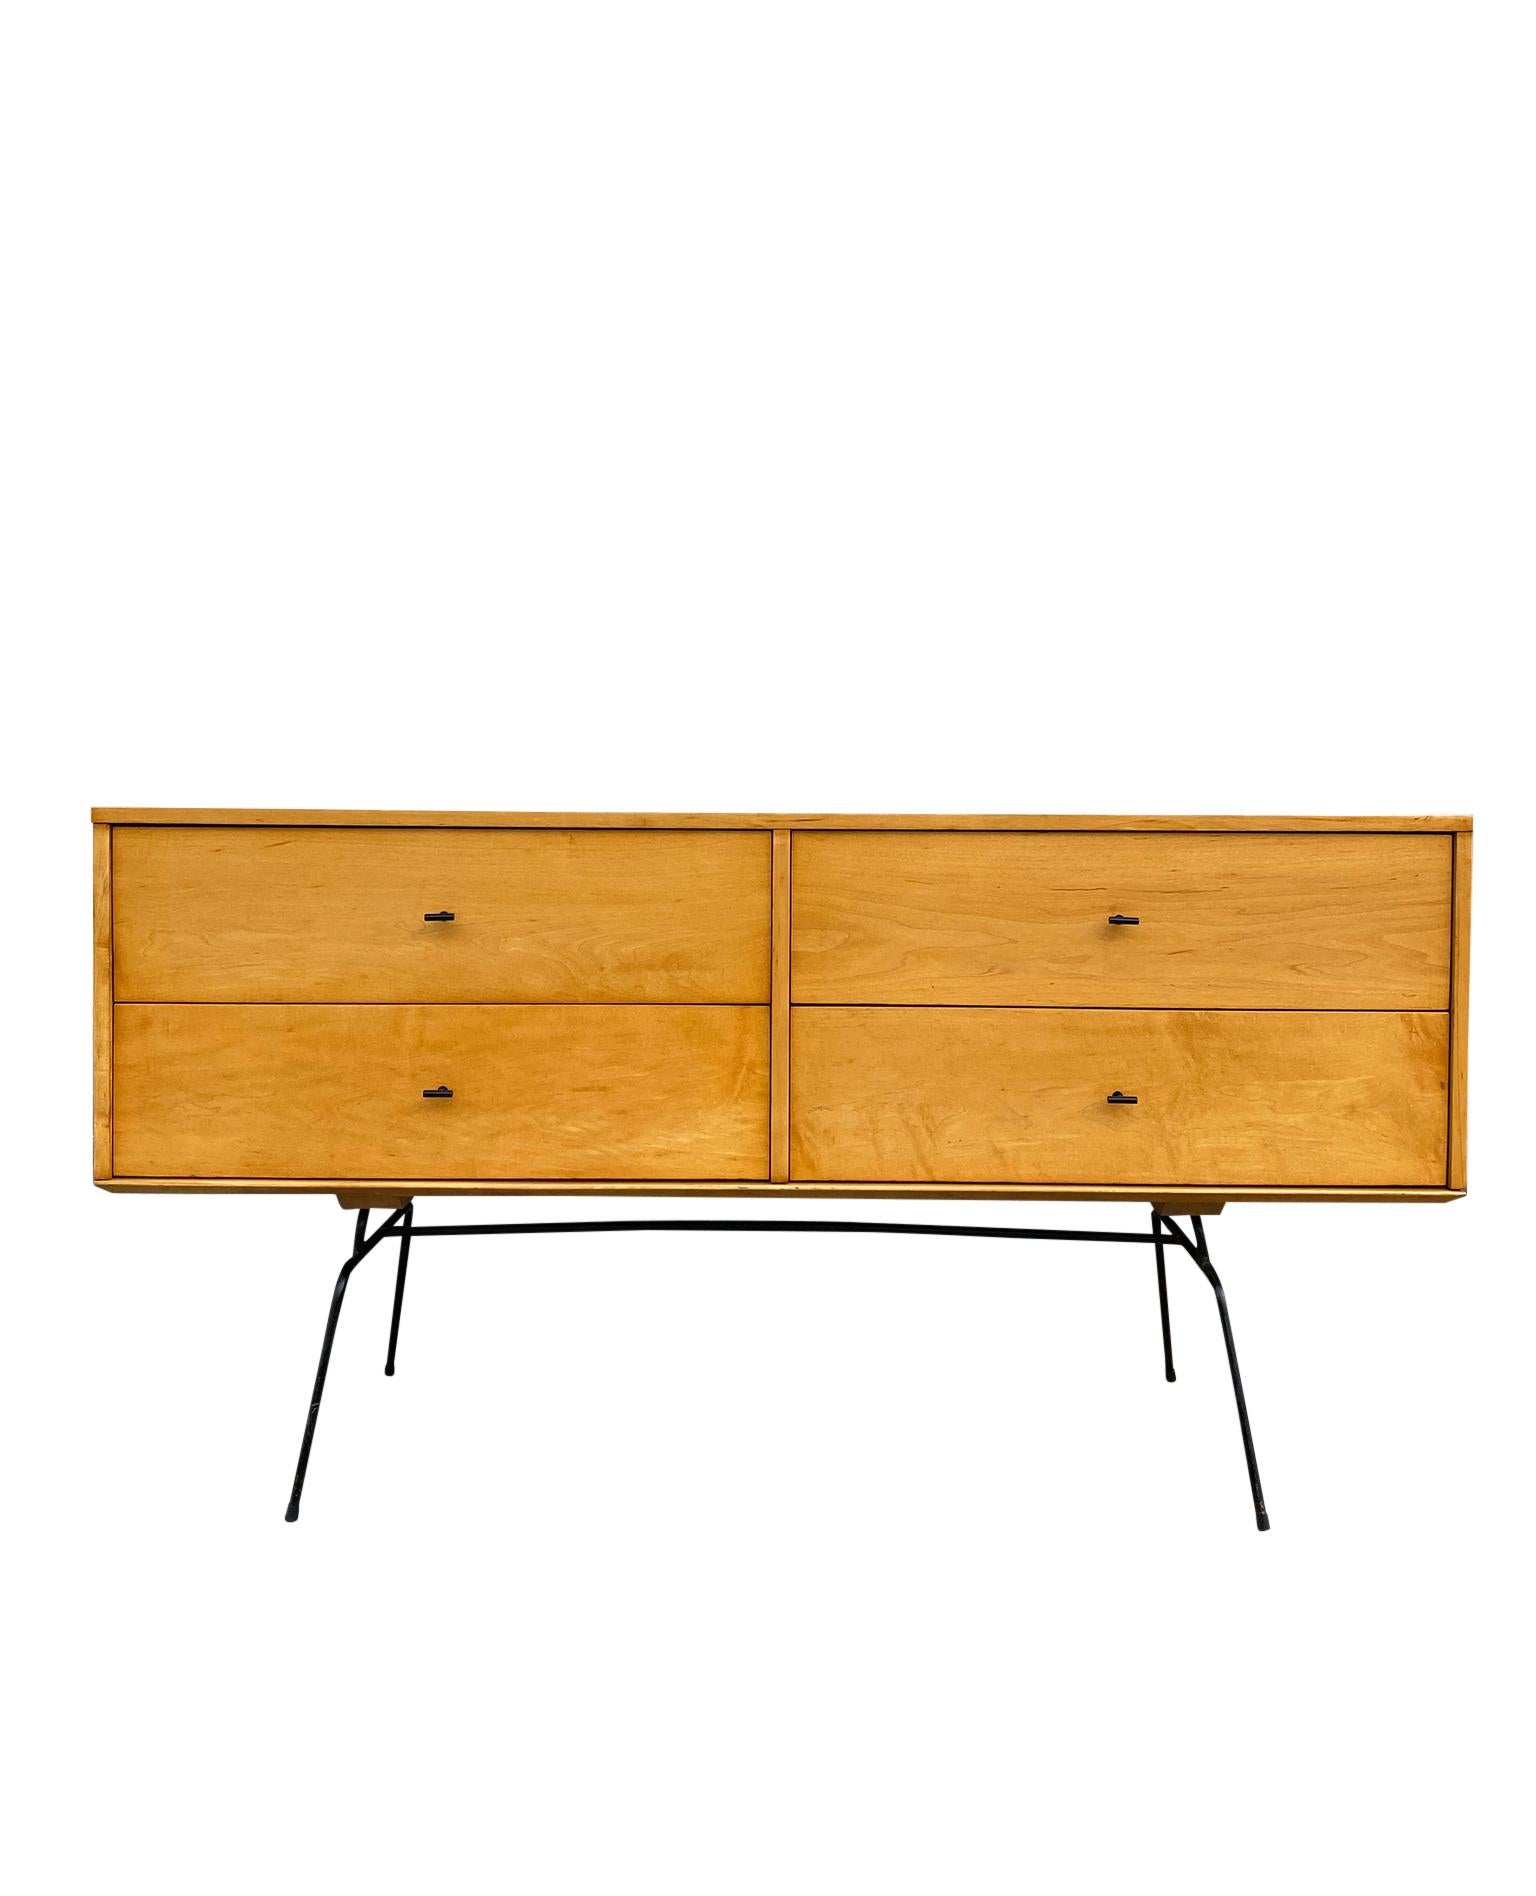 20th Century Midcentury 4 Drawer Low Dresser by Paul McCobb Planner Group #1504 on Iron Base